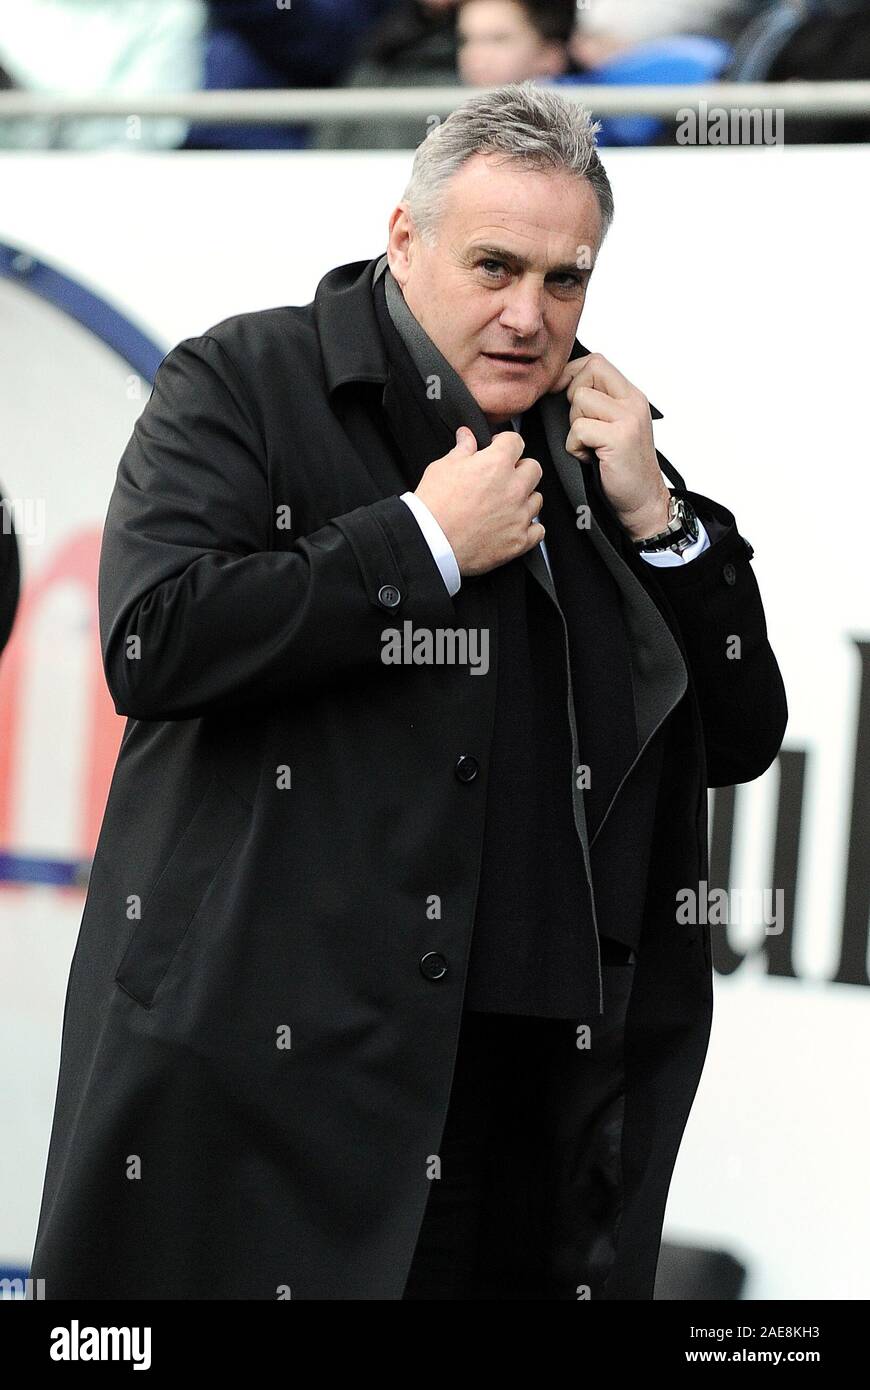 22nd January 2011 - NPower Championship Football - Cardiff Vs Watford - Cardiff Manager Dave Jones.  Photographer: Paul Roberts / One Up Top/Alamy. Stock Photo